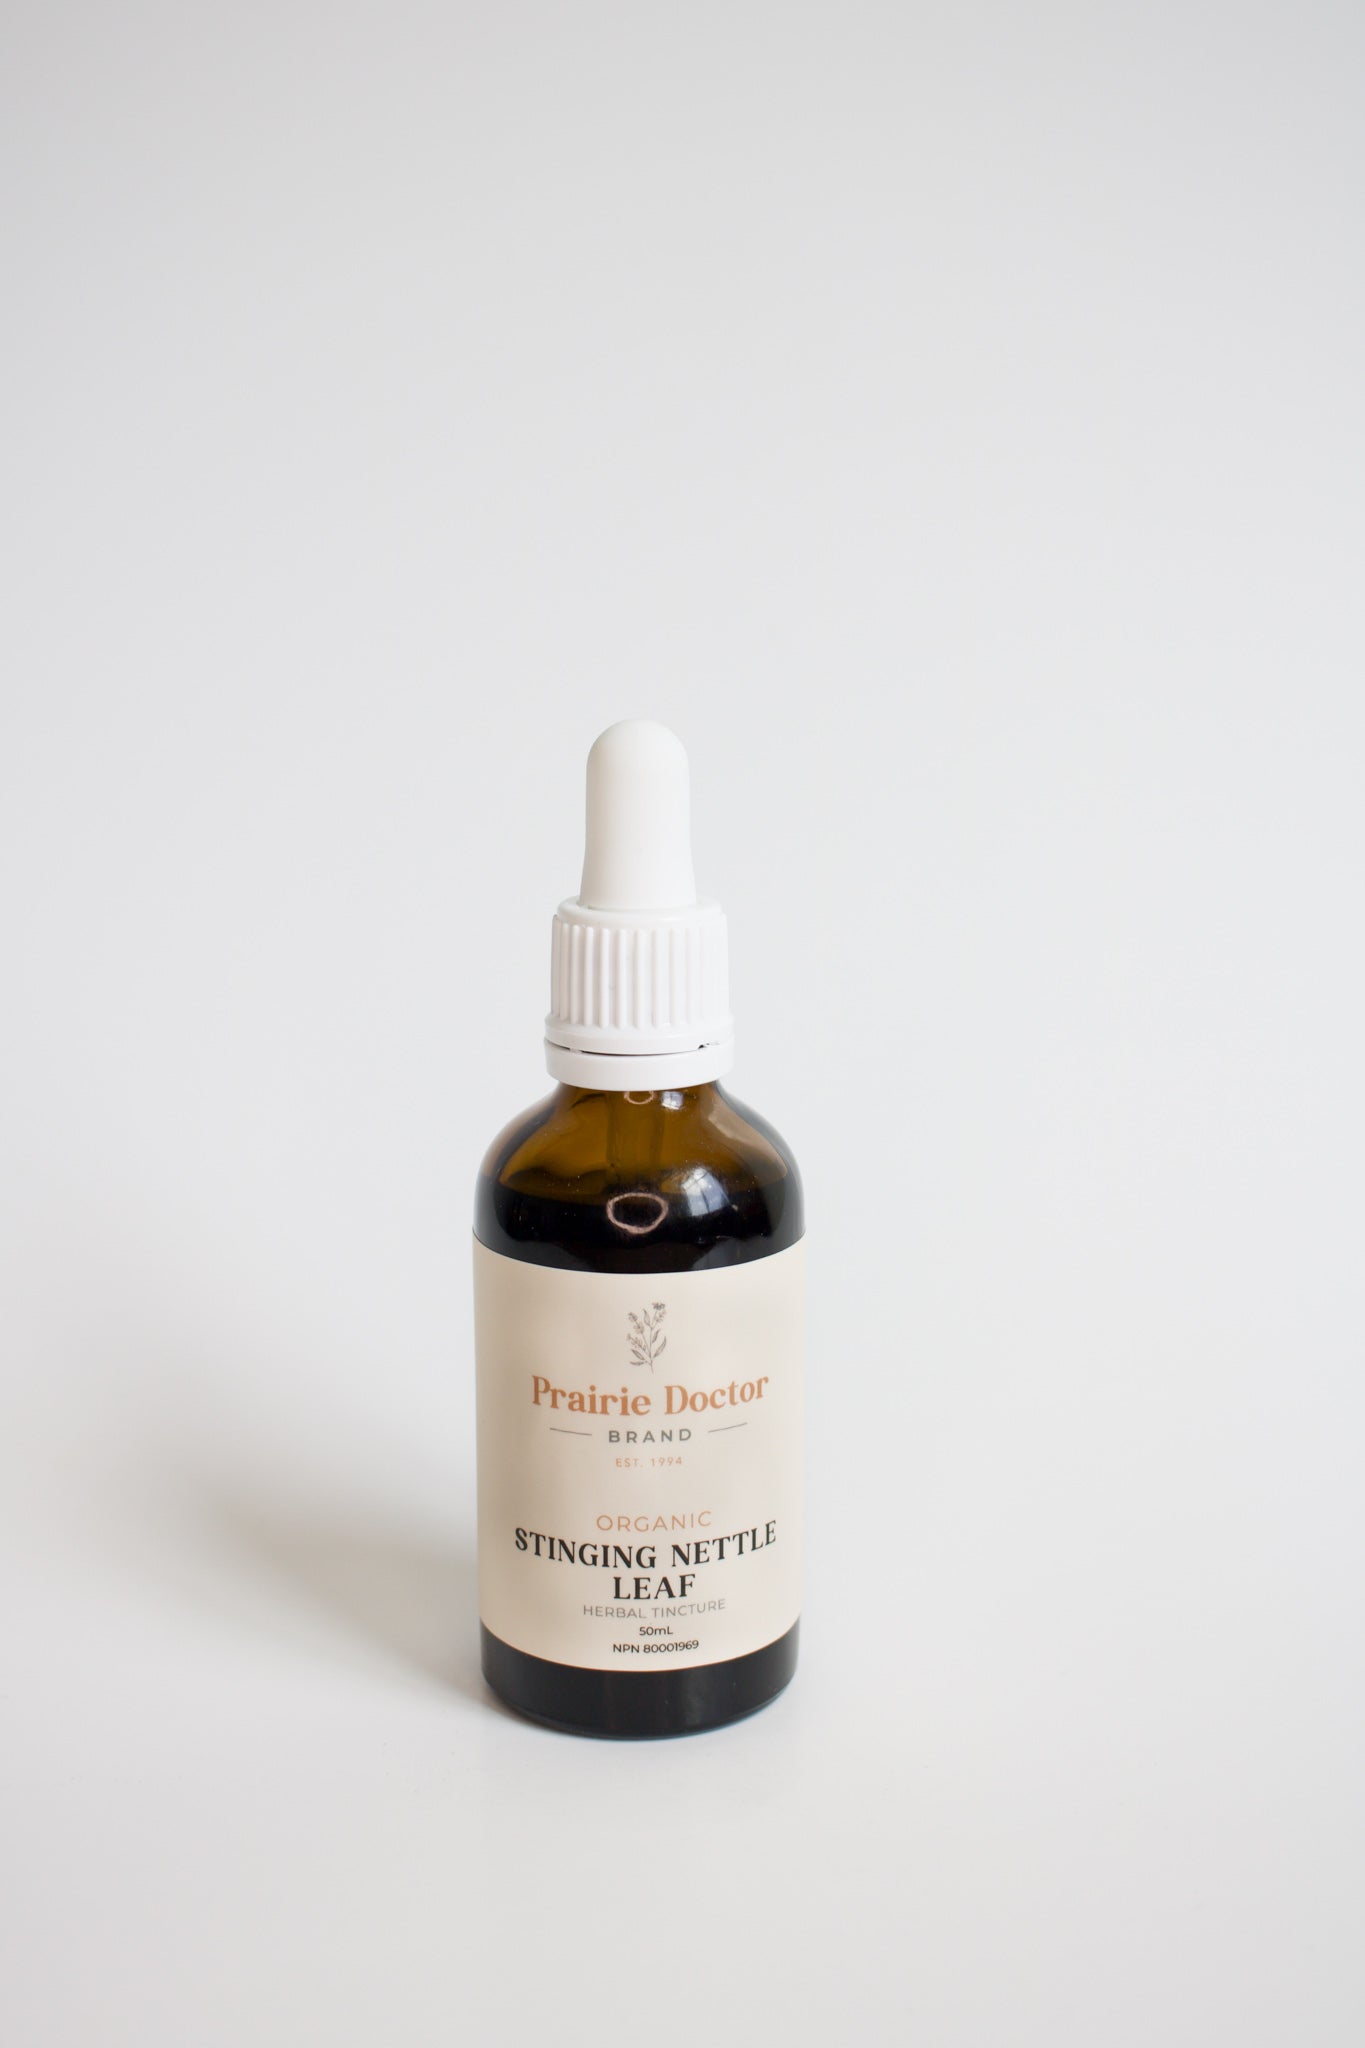 Our organic Stinging Nettle Leaf tincture can be used as a diuretic and to help relieve symptoms of seasonal allergies.